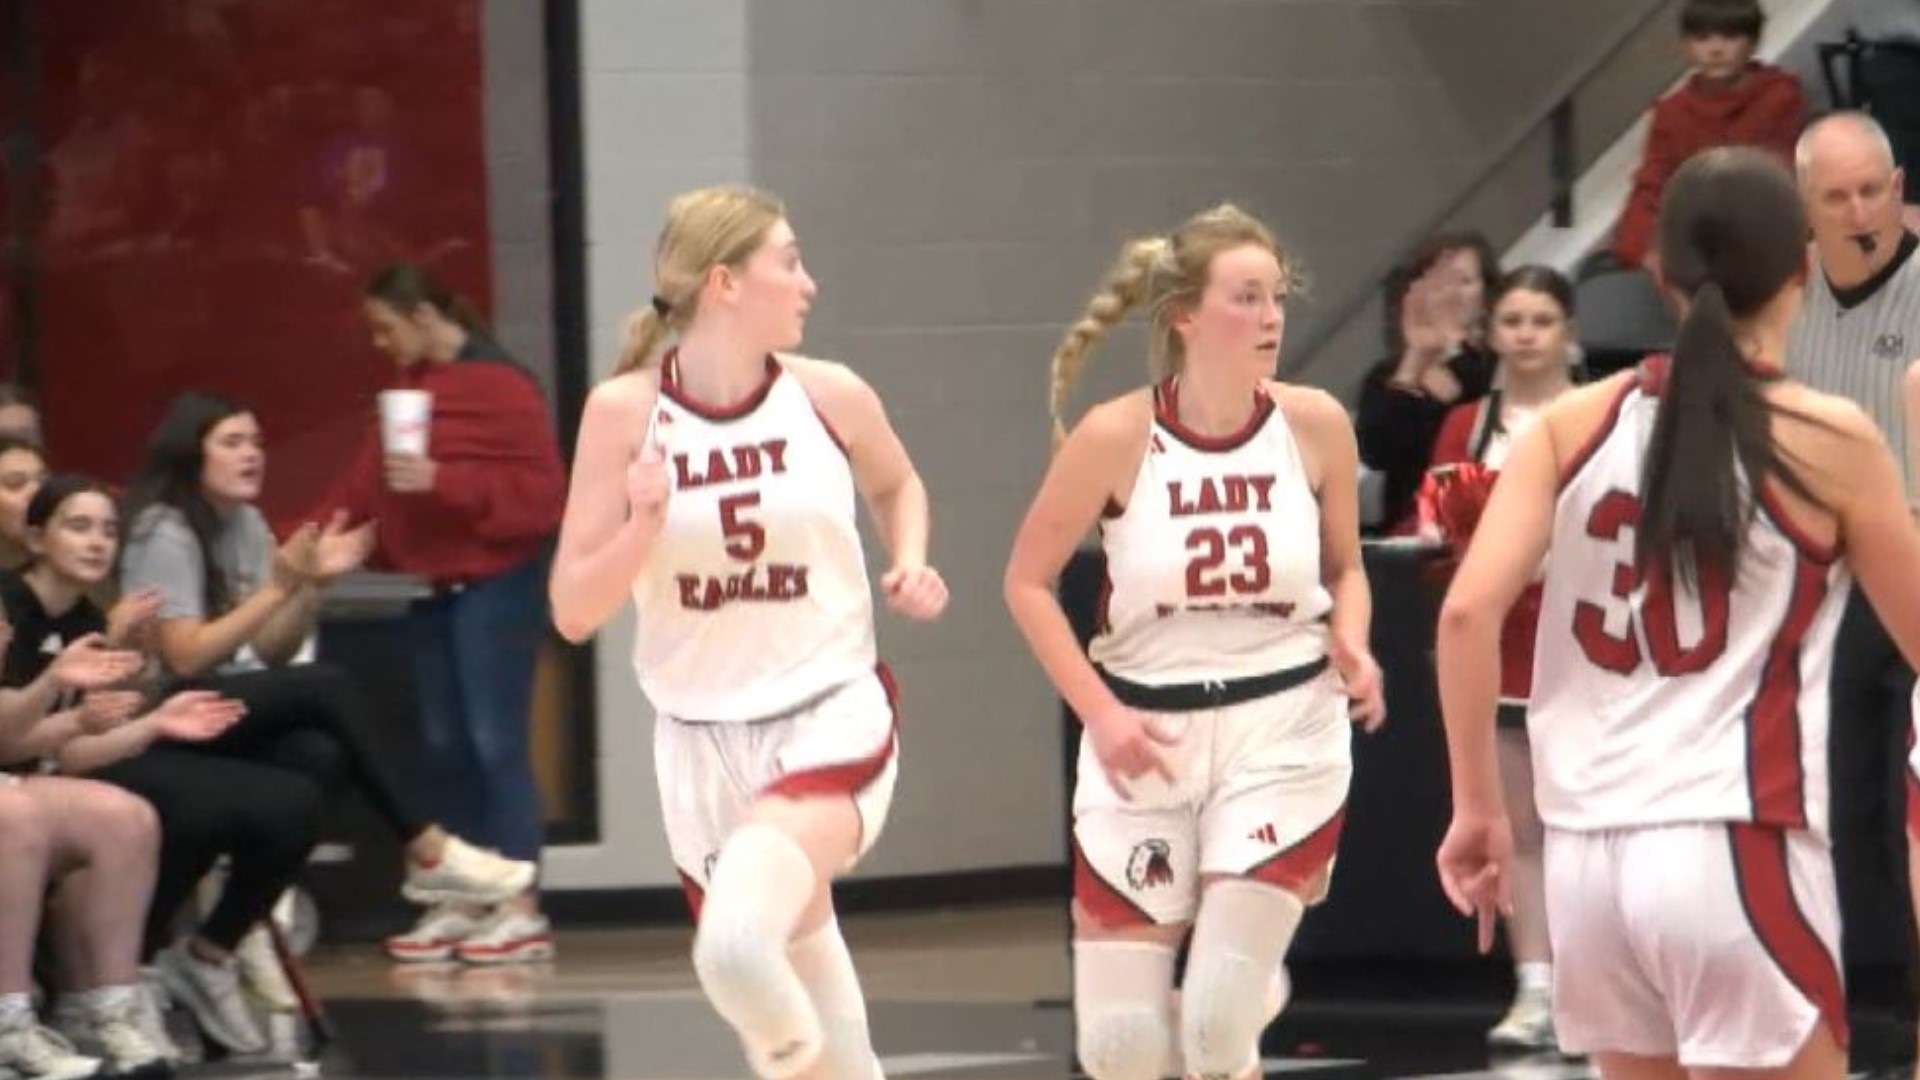 The Vilonia girls basketball team is back in Hot Springs for the state finals, but they want more after falling short a year ago.